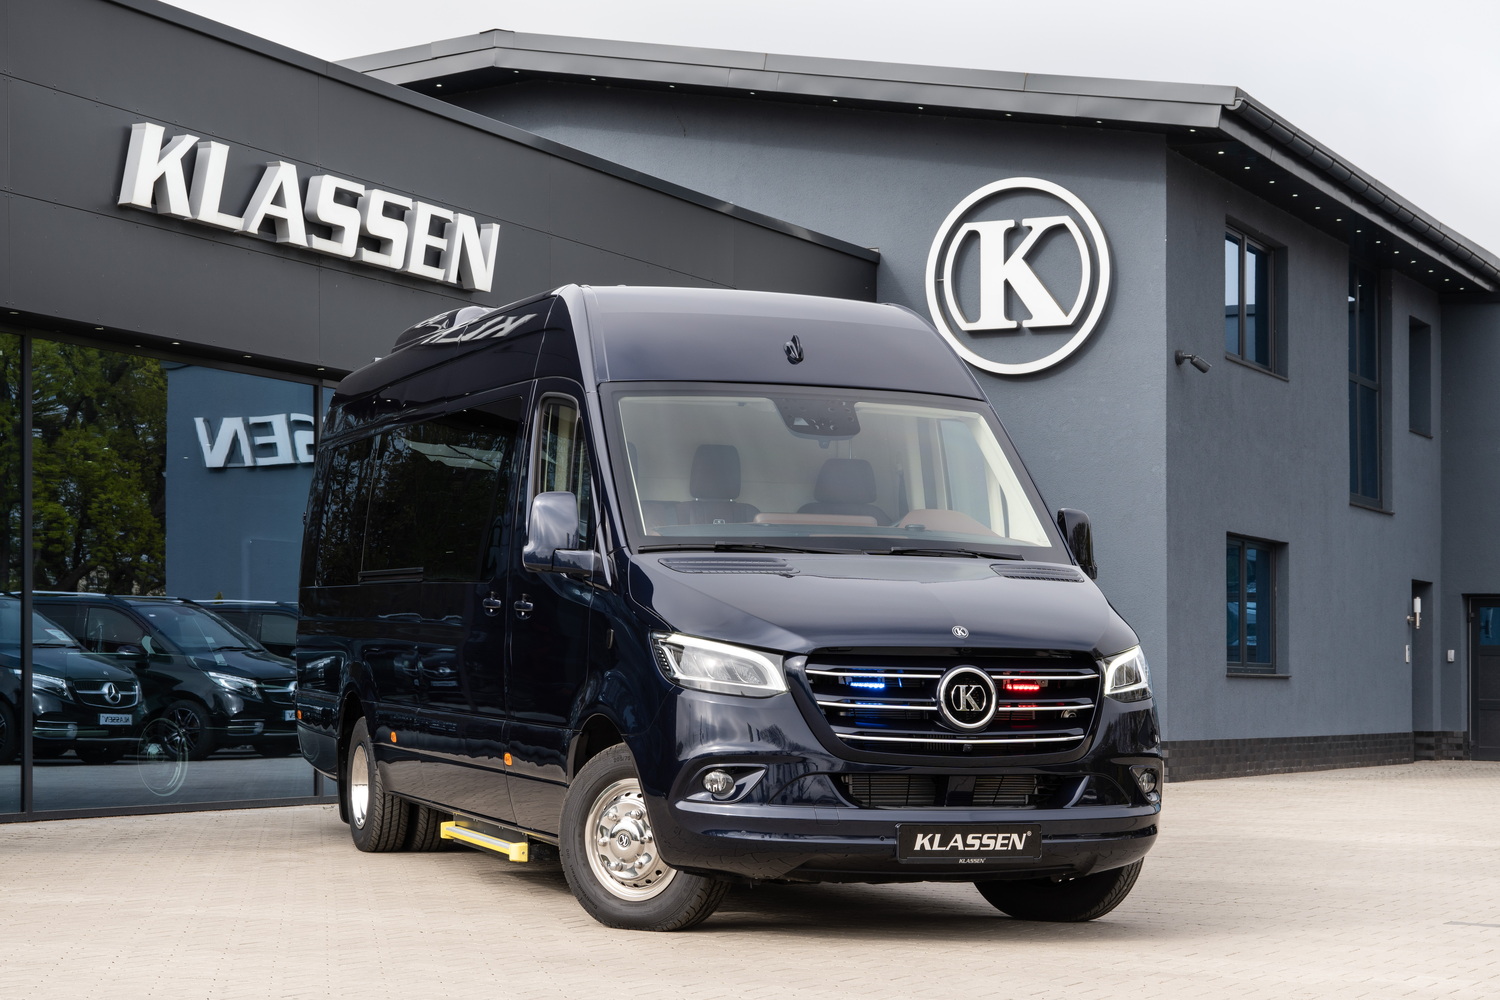 519 Luxus VIP Jet - WC, TV - KLASSEN MANUFACTURE. We provide you hereby the new Mercedes Benz Sprinter 519 CDI noble limited FIRST CLASS Edition.